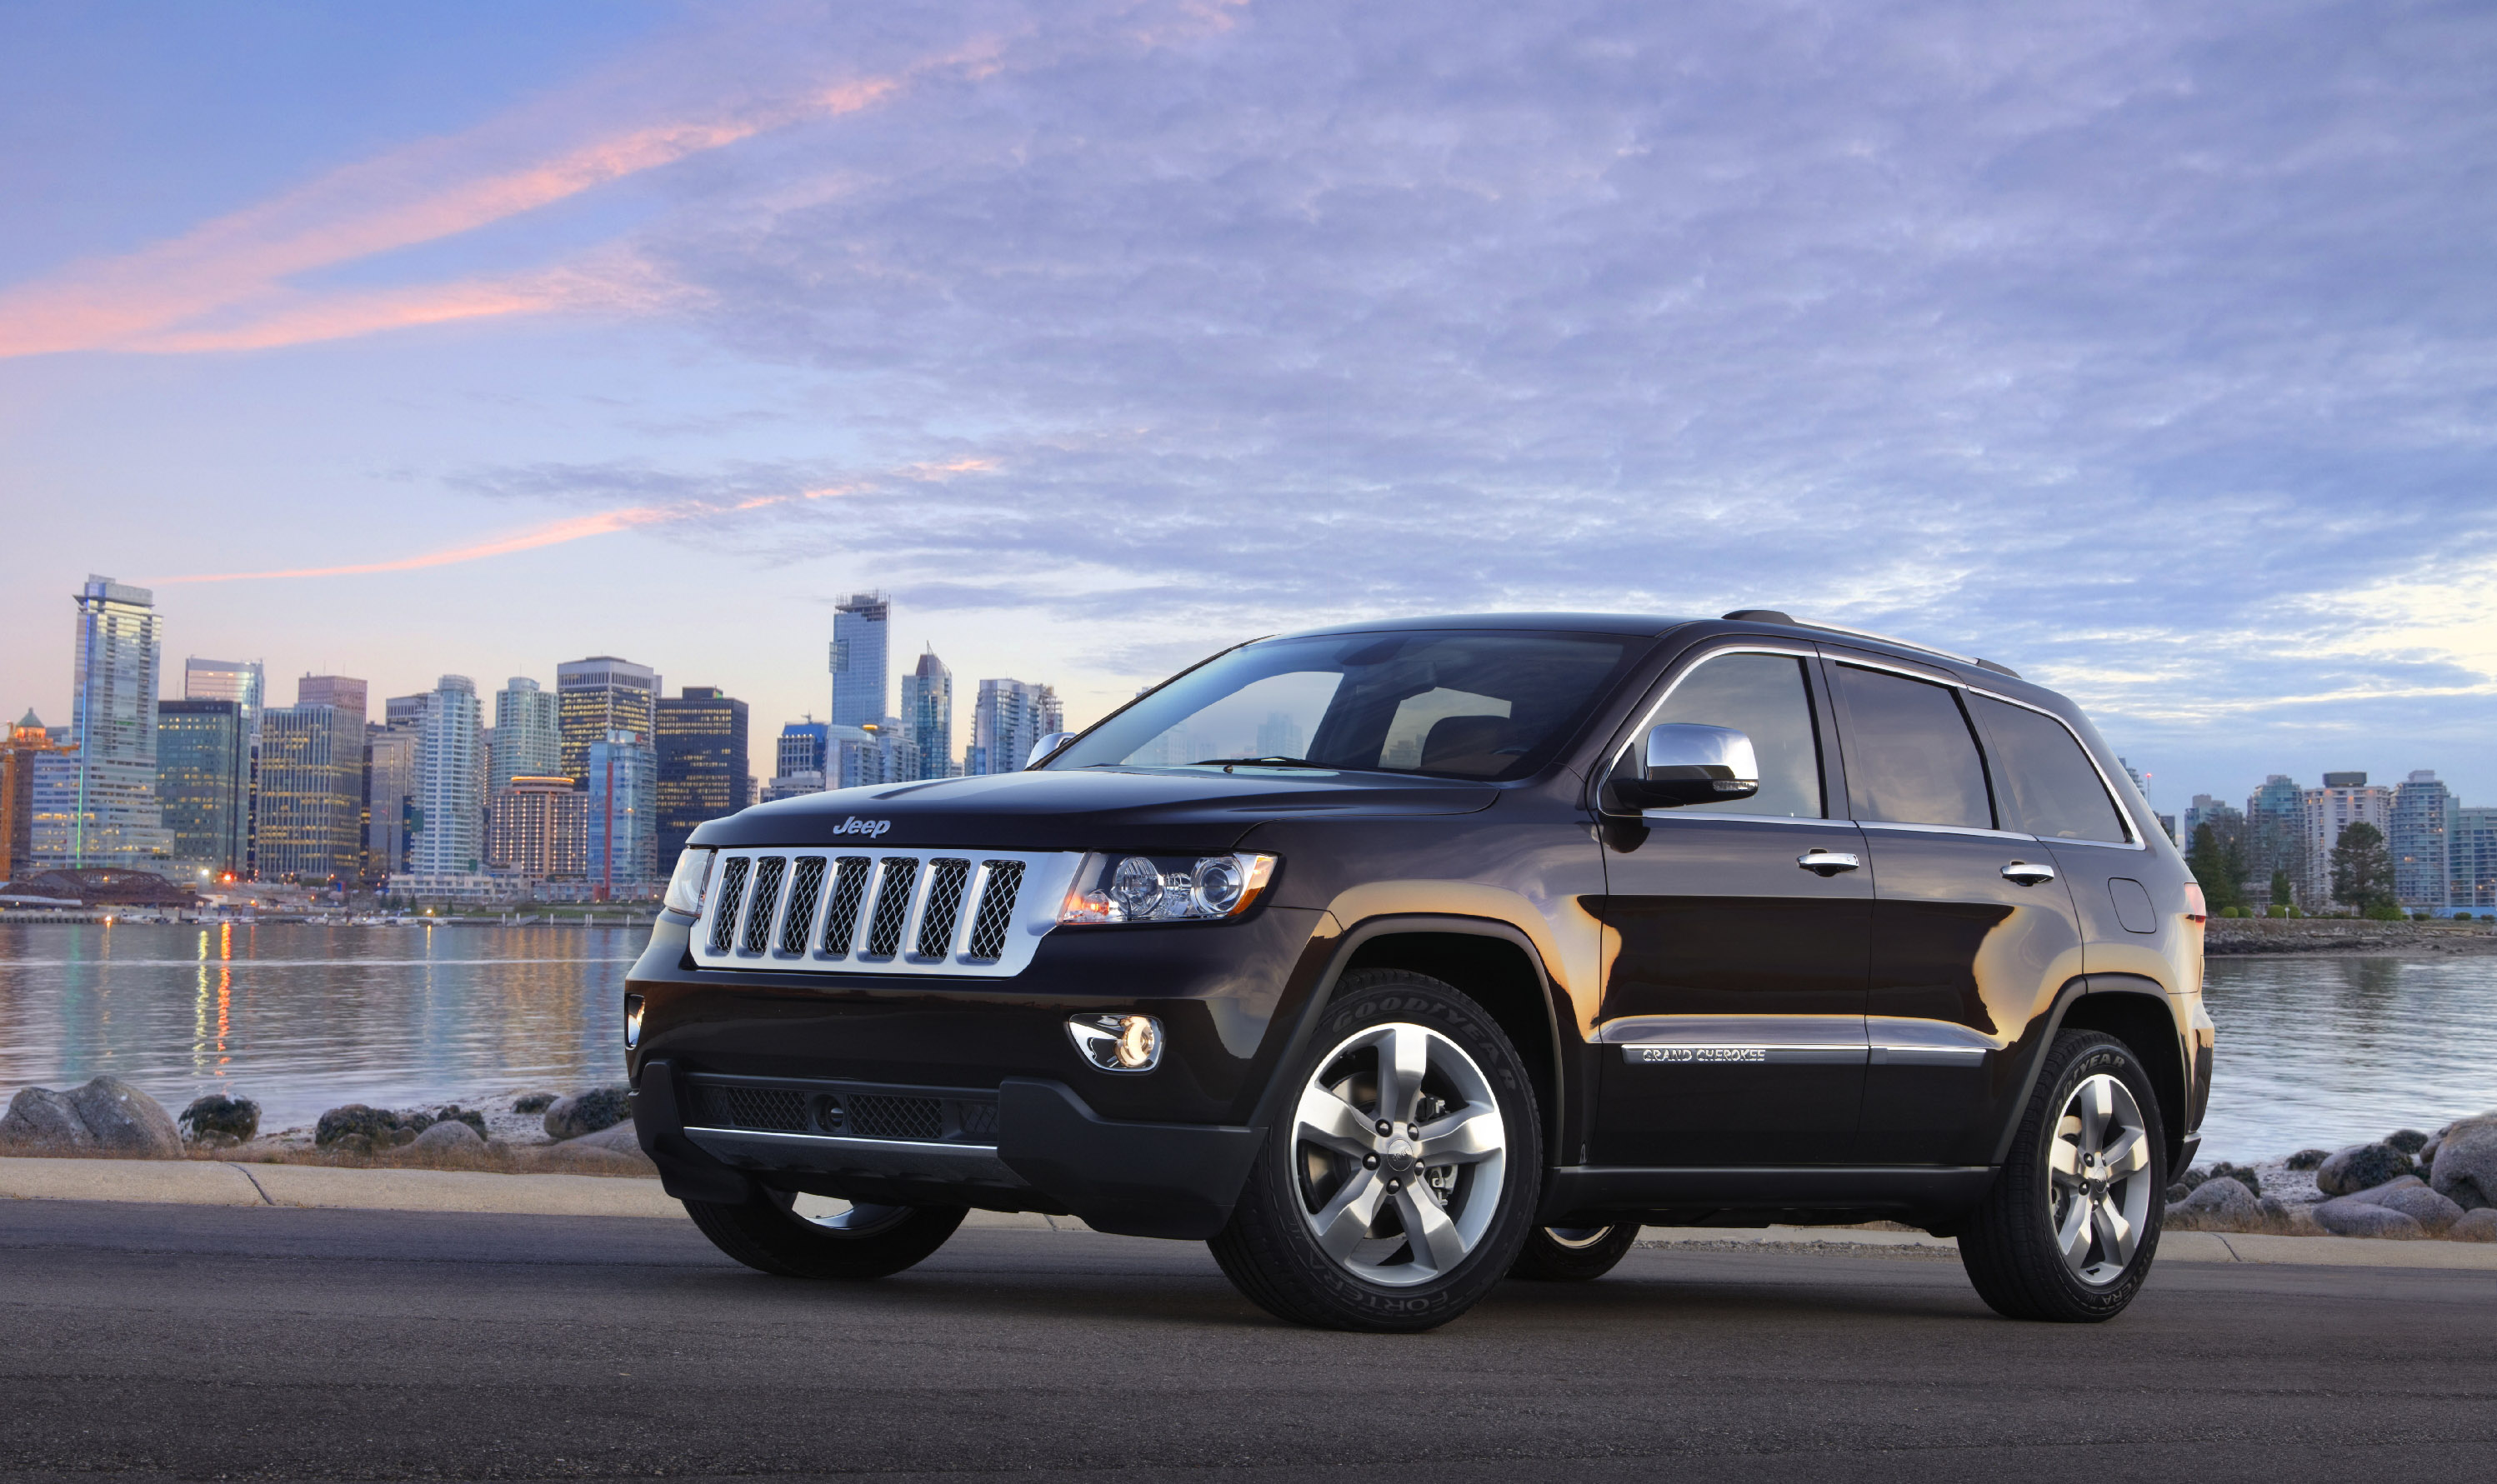 2011 Jeep Grand Cherokee - HD Pictures @ carsinvasion.com